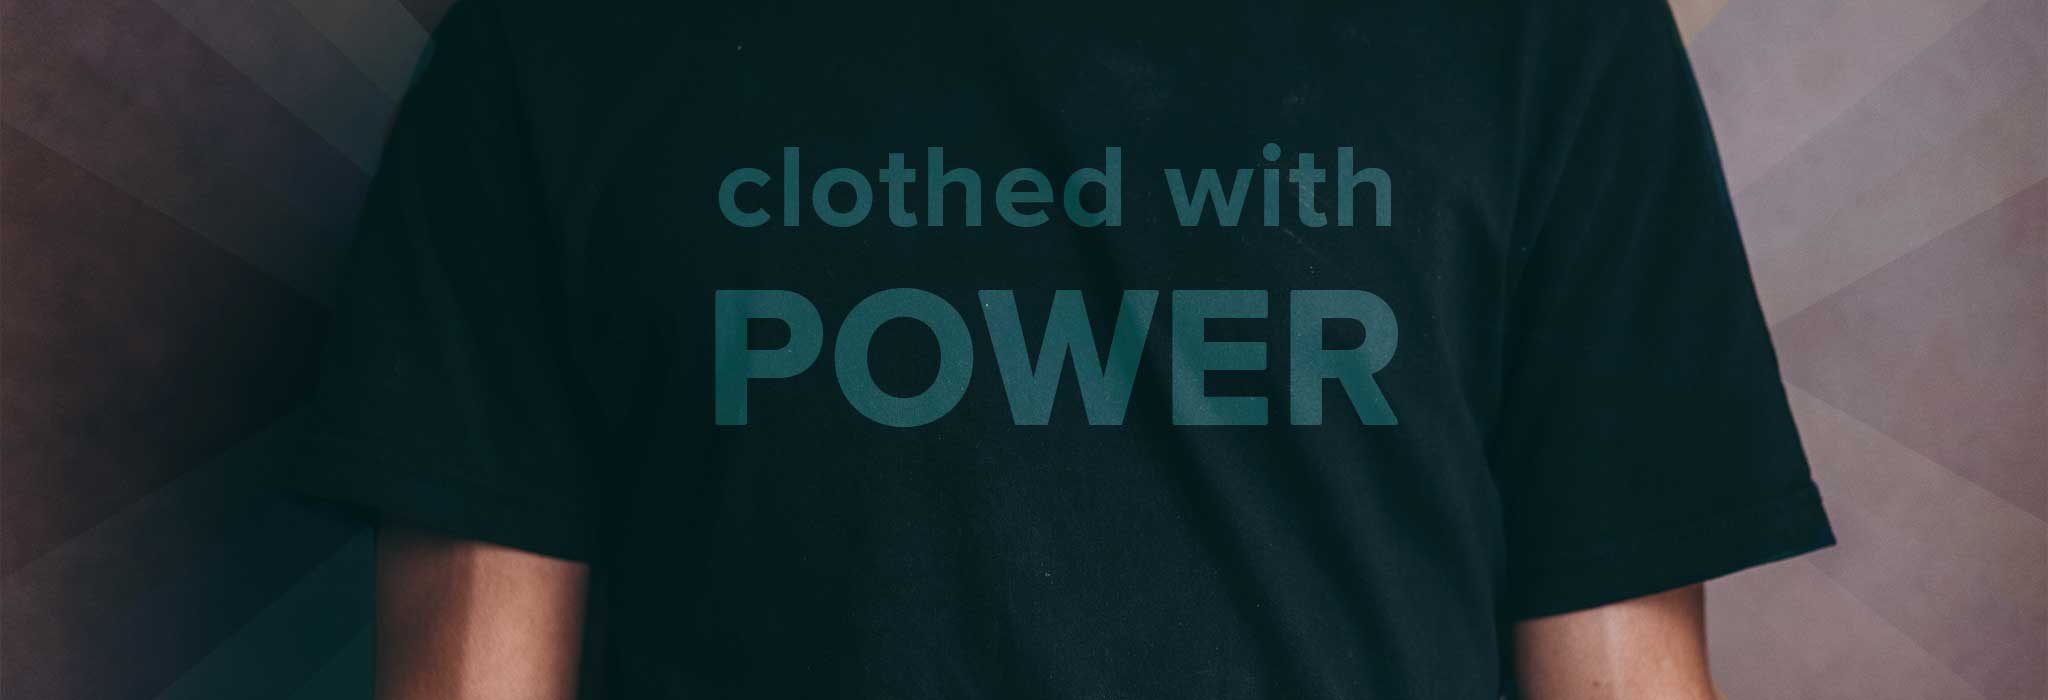 Clothed with Power